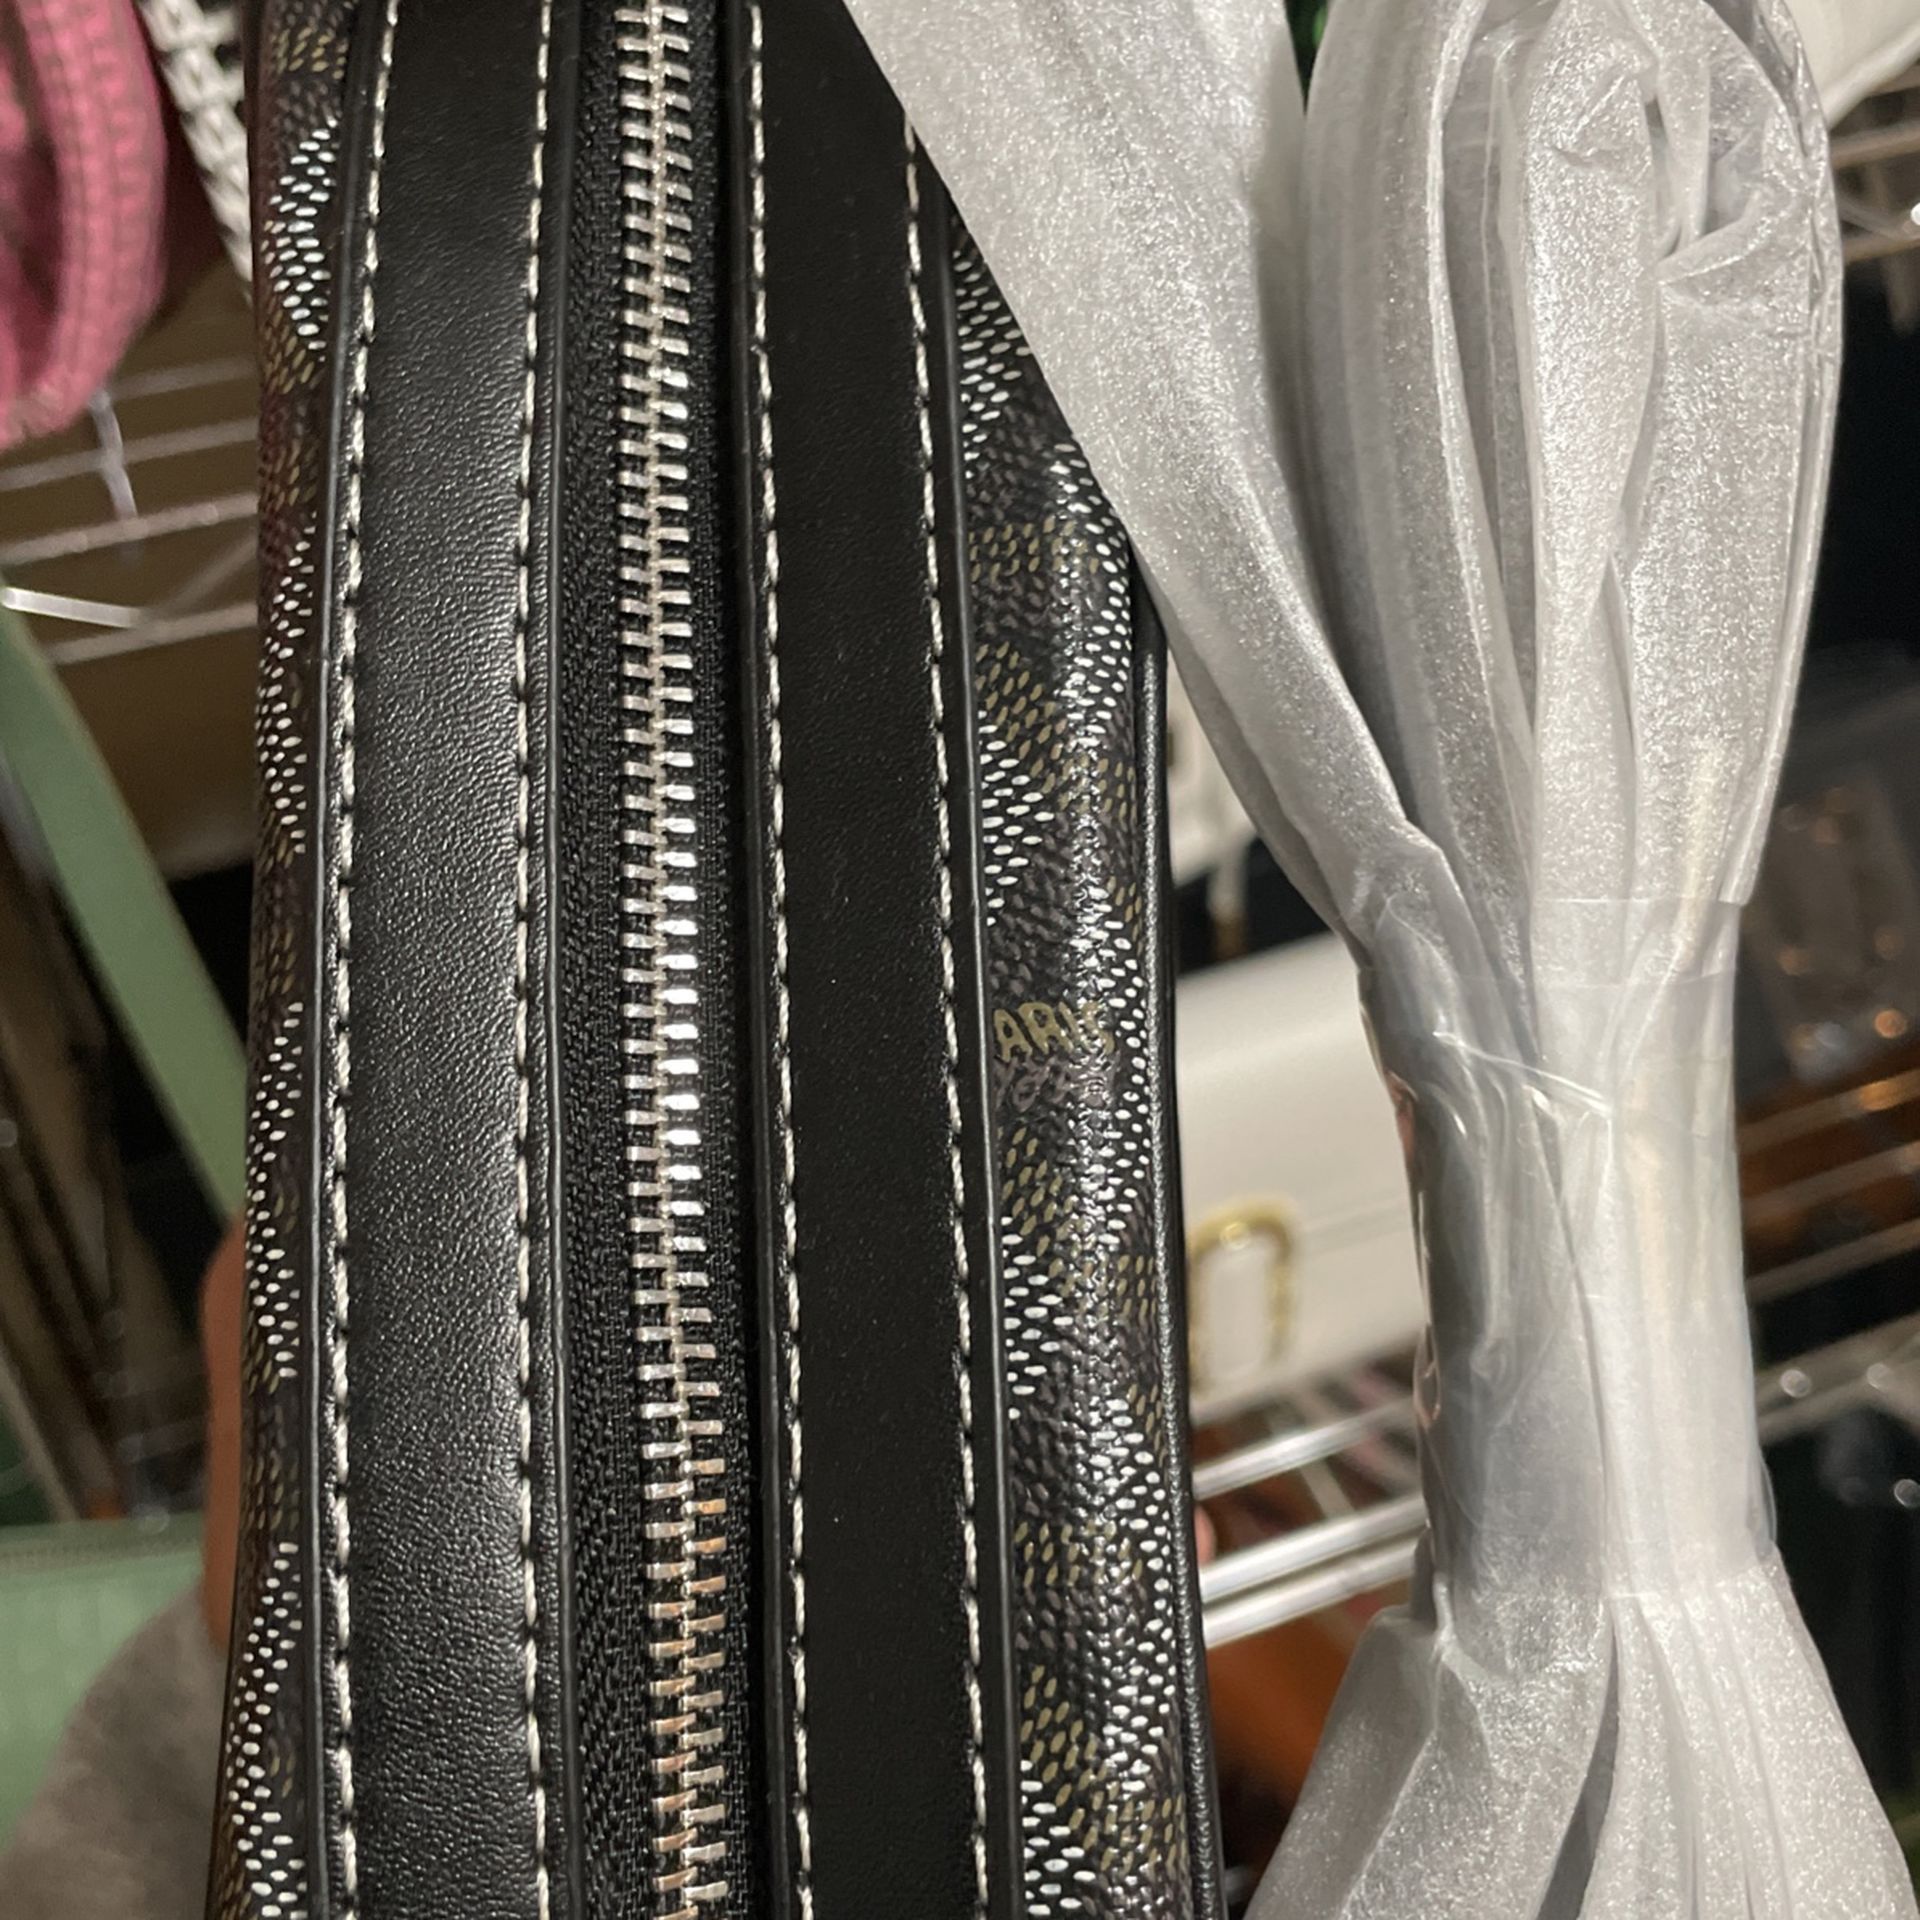 Goyard Camera Bag for Sale in Humble, TX - OfferUp